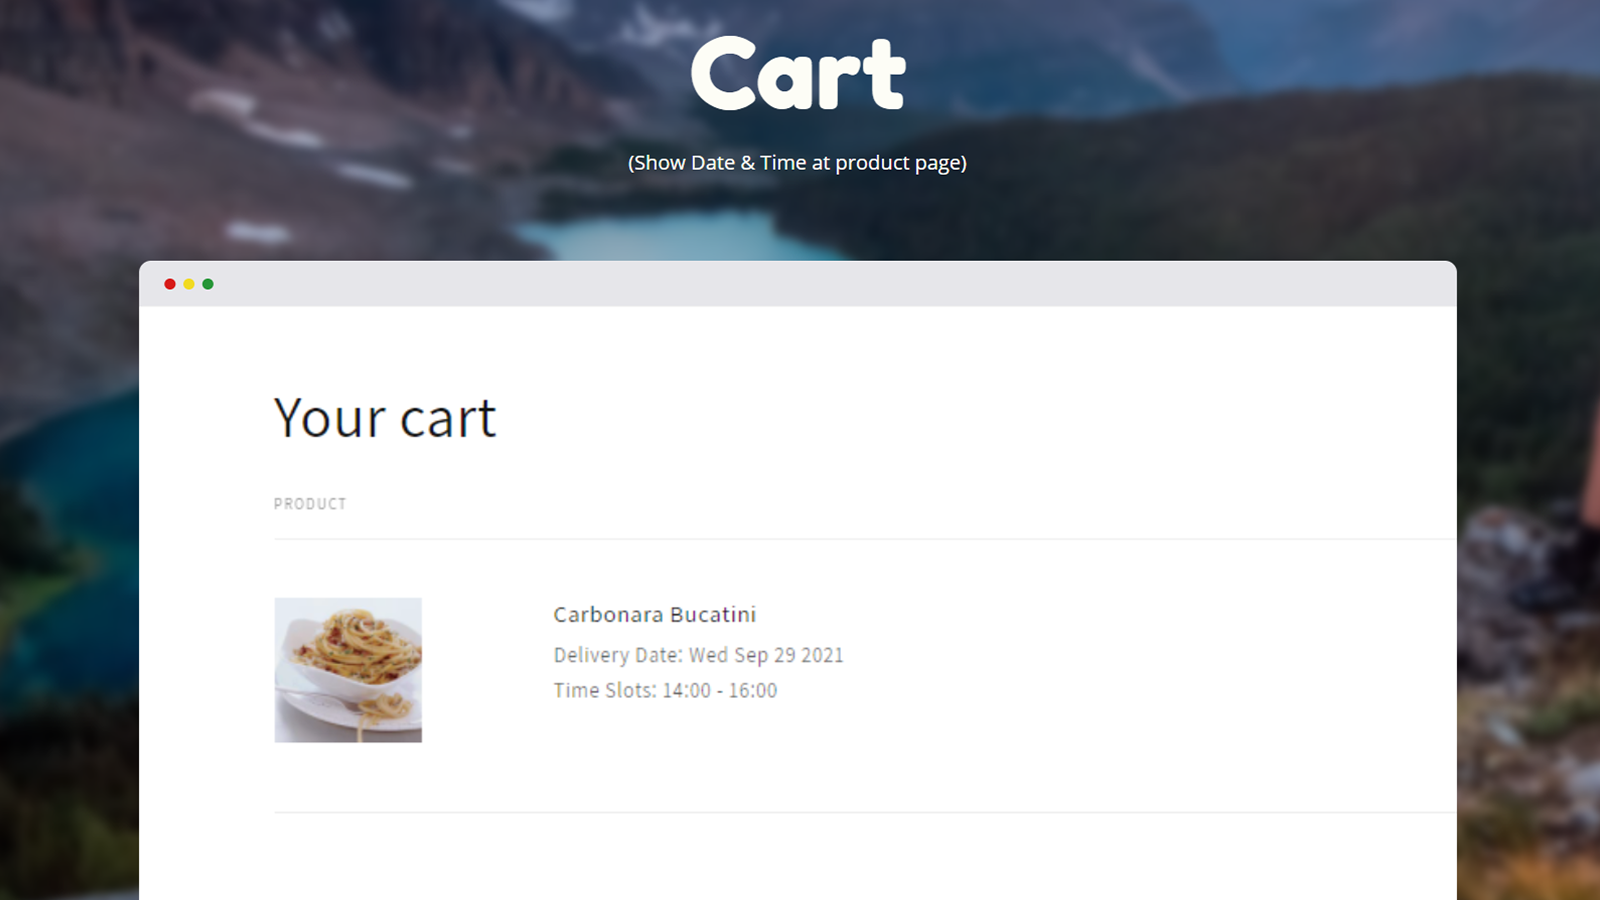 Delivery Date at Cart Page